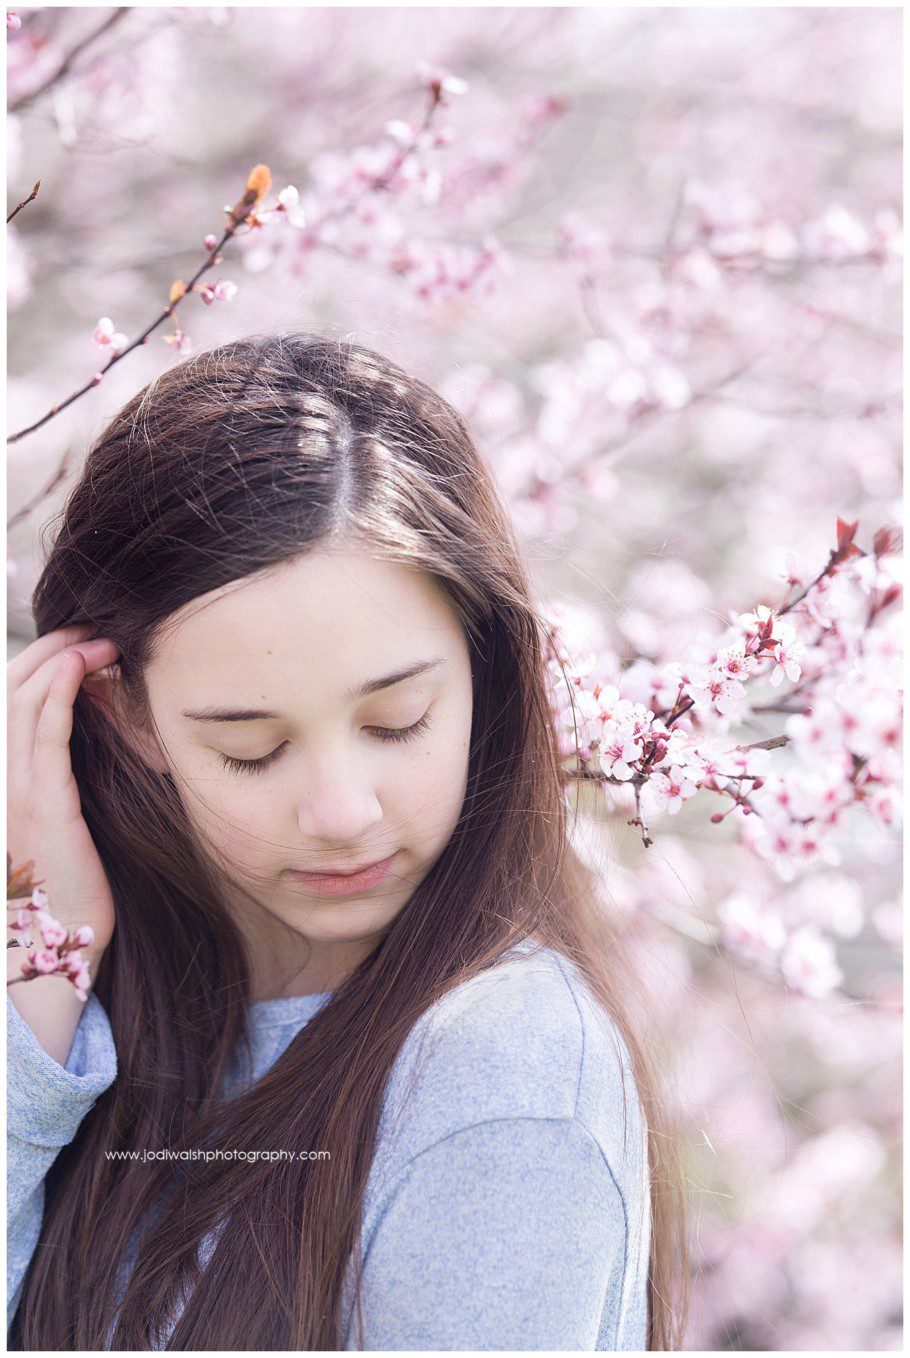 image backyard spring portrait with Jodi Walsh Photography. the photo is of a teen girl with dark hair with pink blossoms all around her. She's looking down at her shoulder and gently pushing her hair behind her ear.